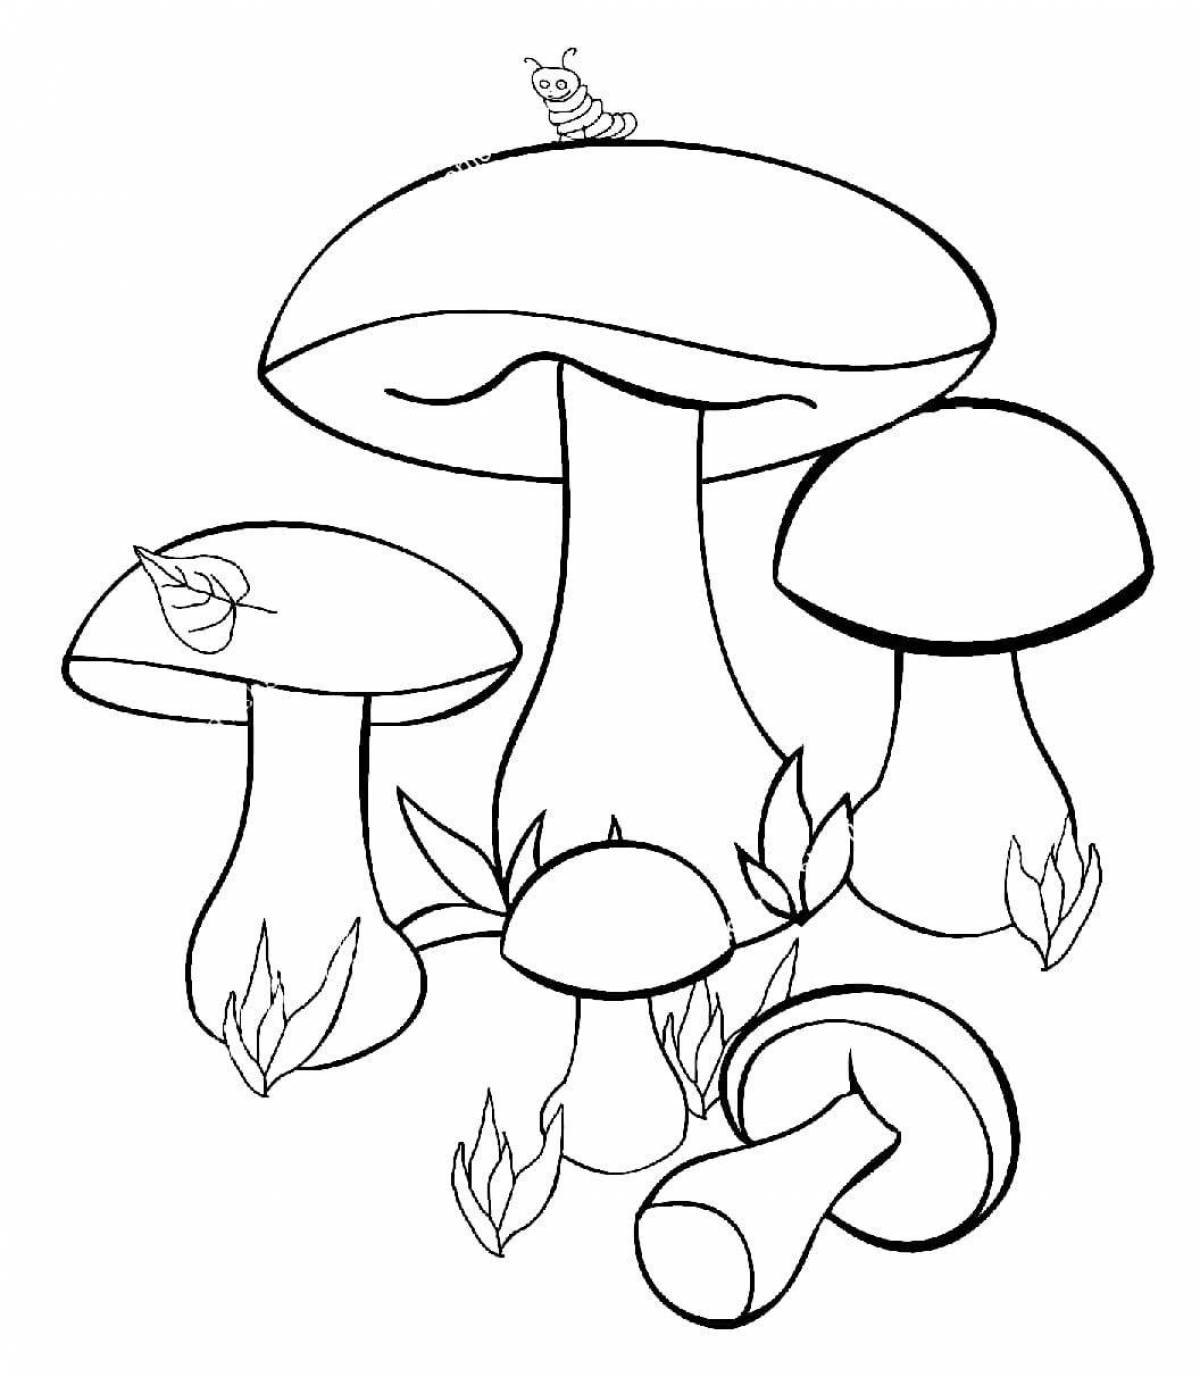 Cute mushroom coloring pages for 3-4 year olds